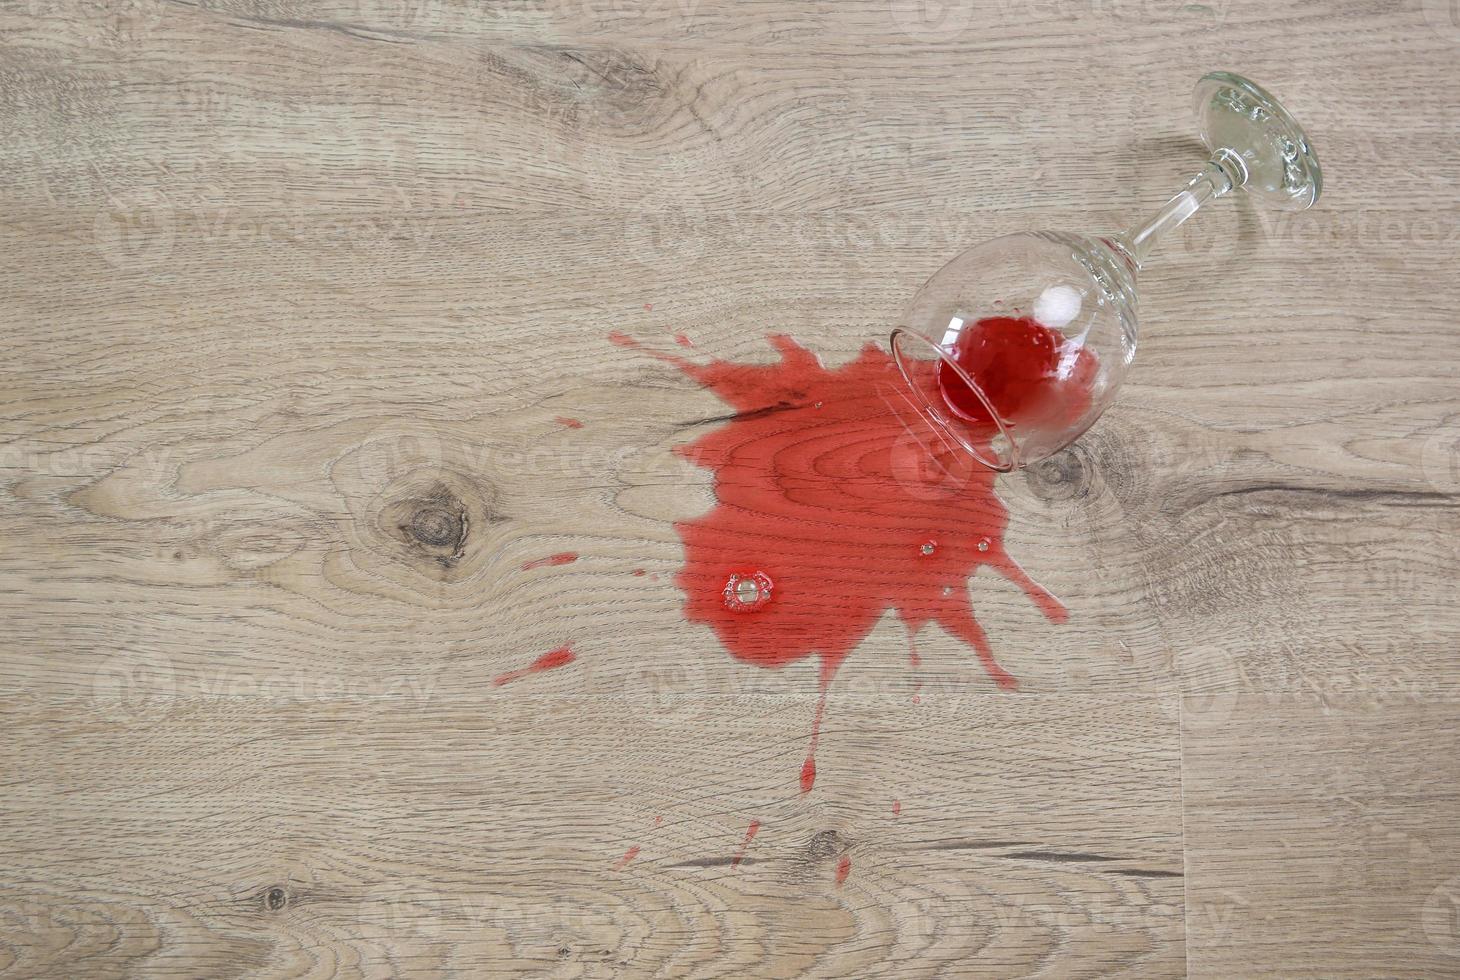 Glass of red wine fell on laminate, wine spilled on floor. photo